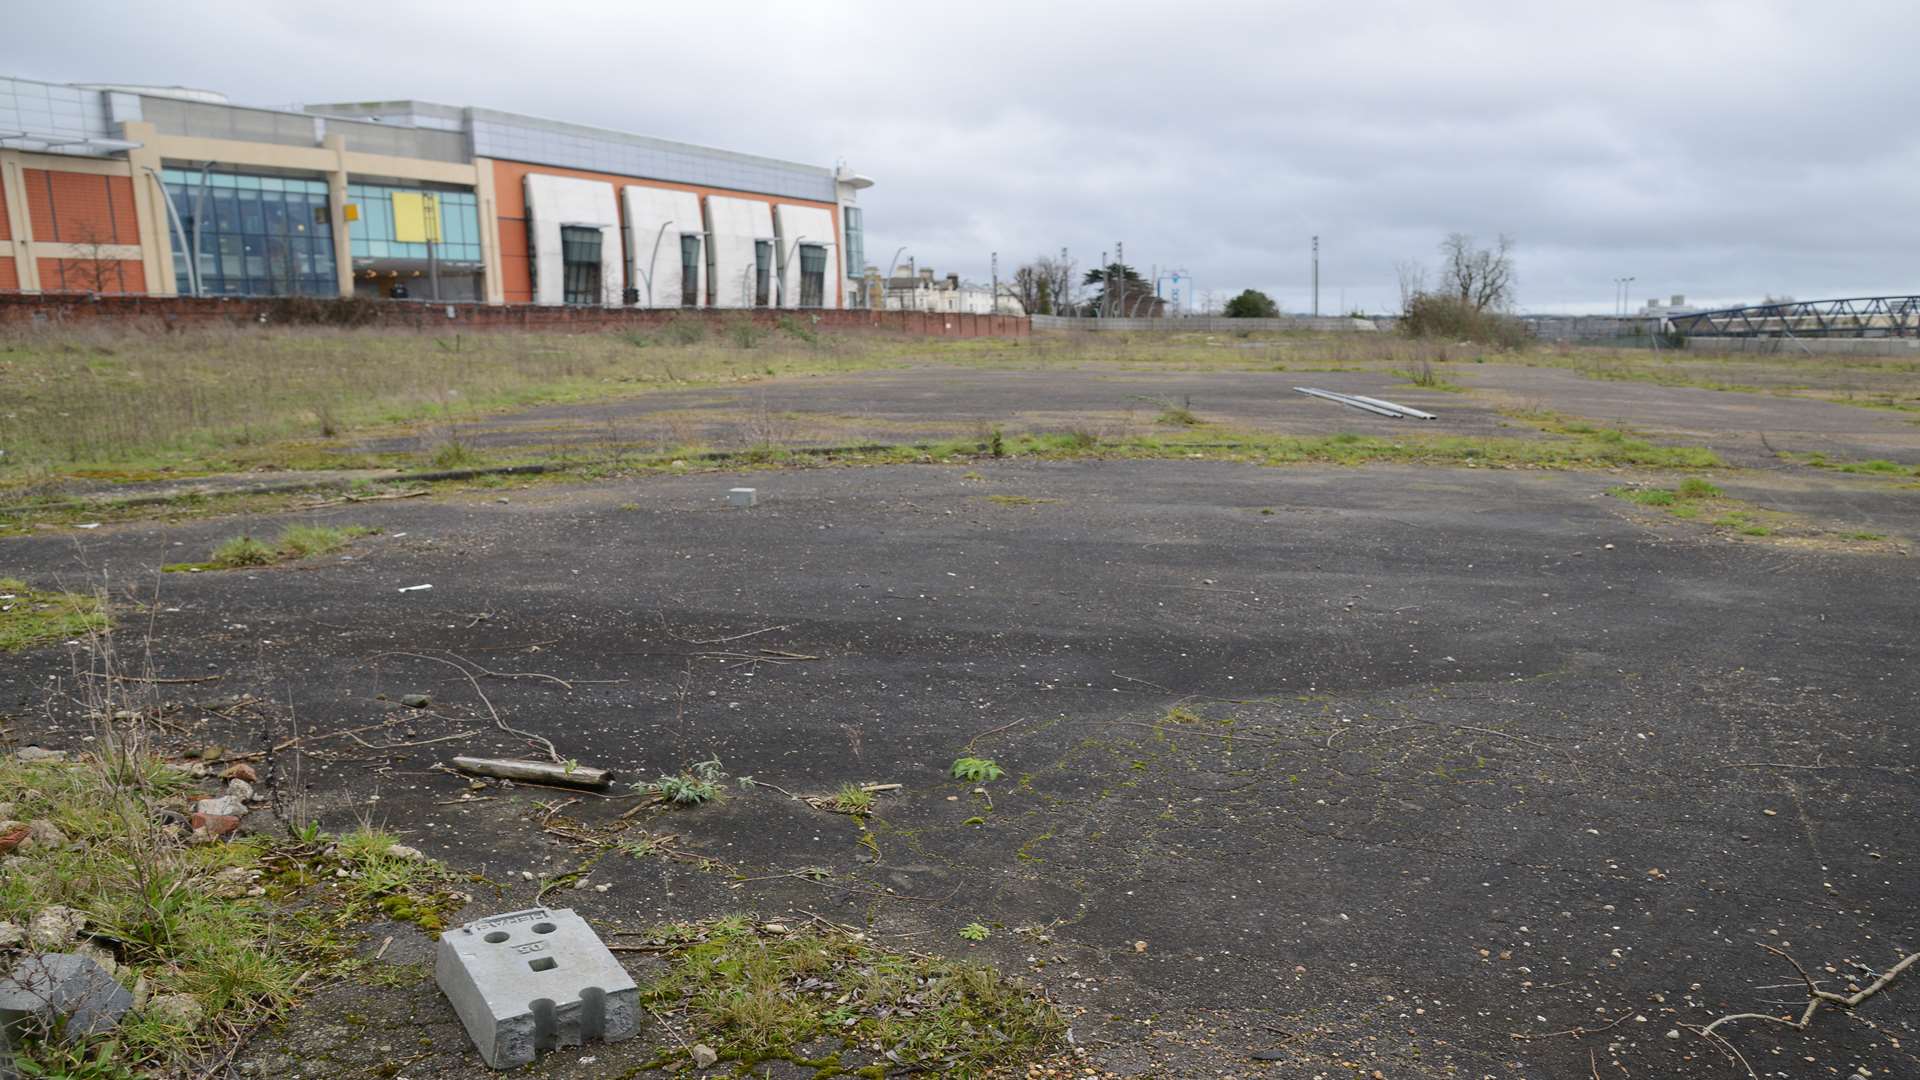 The land set for redevelopment.